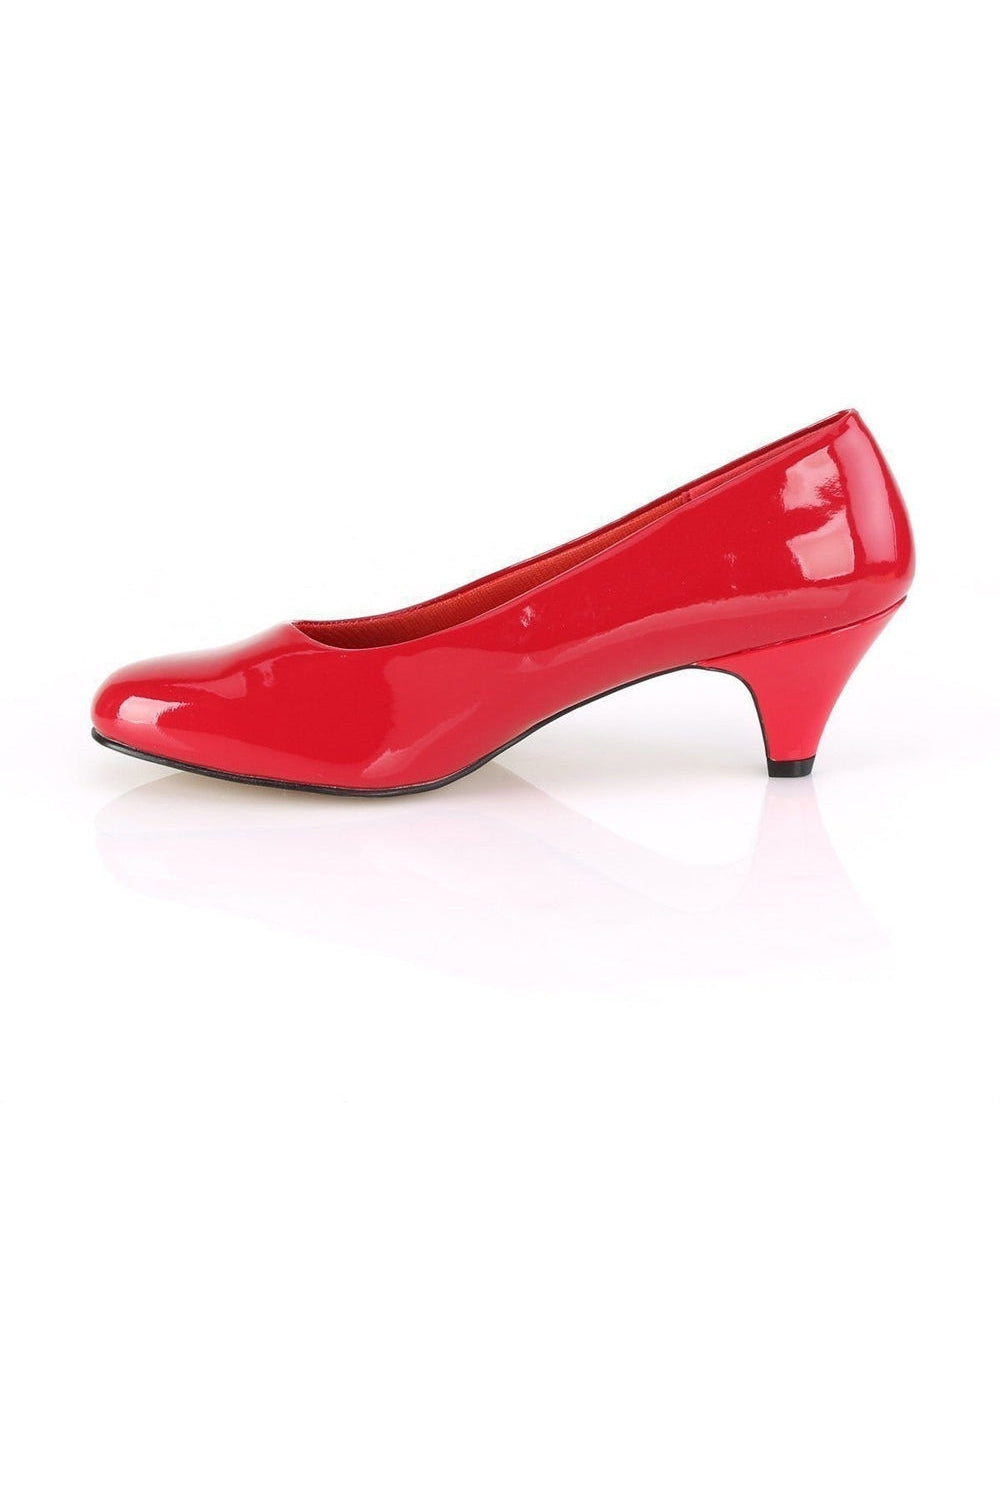 FEFE-01 Pump | Red Patent-Pleaser Pink Label-SEXYSHOES.COM